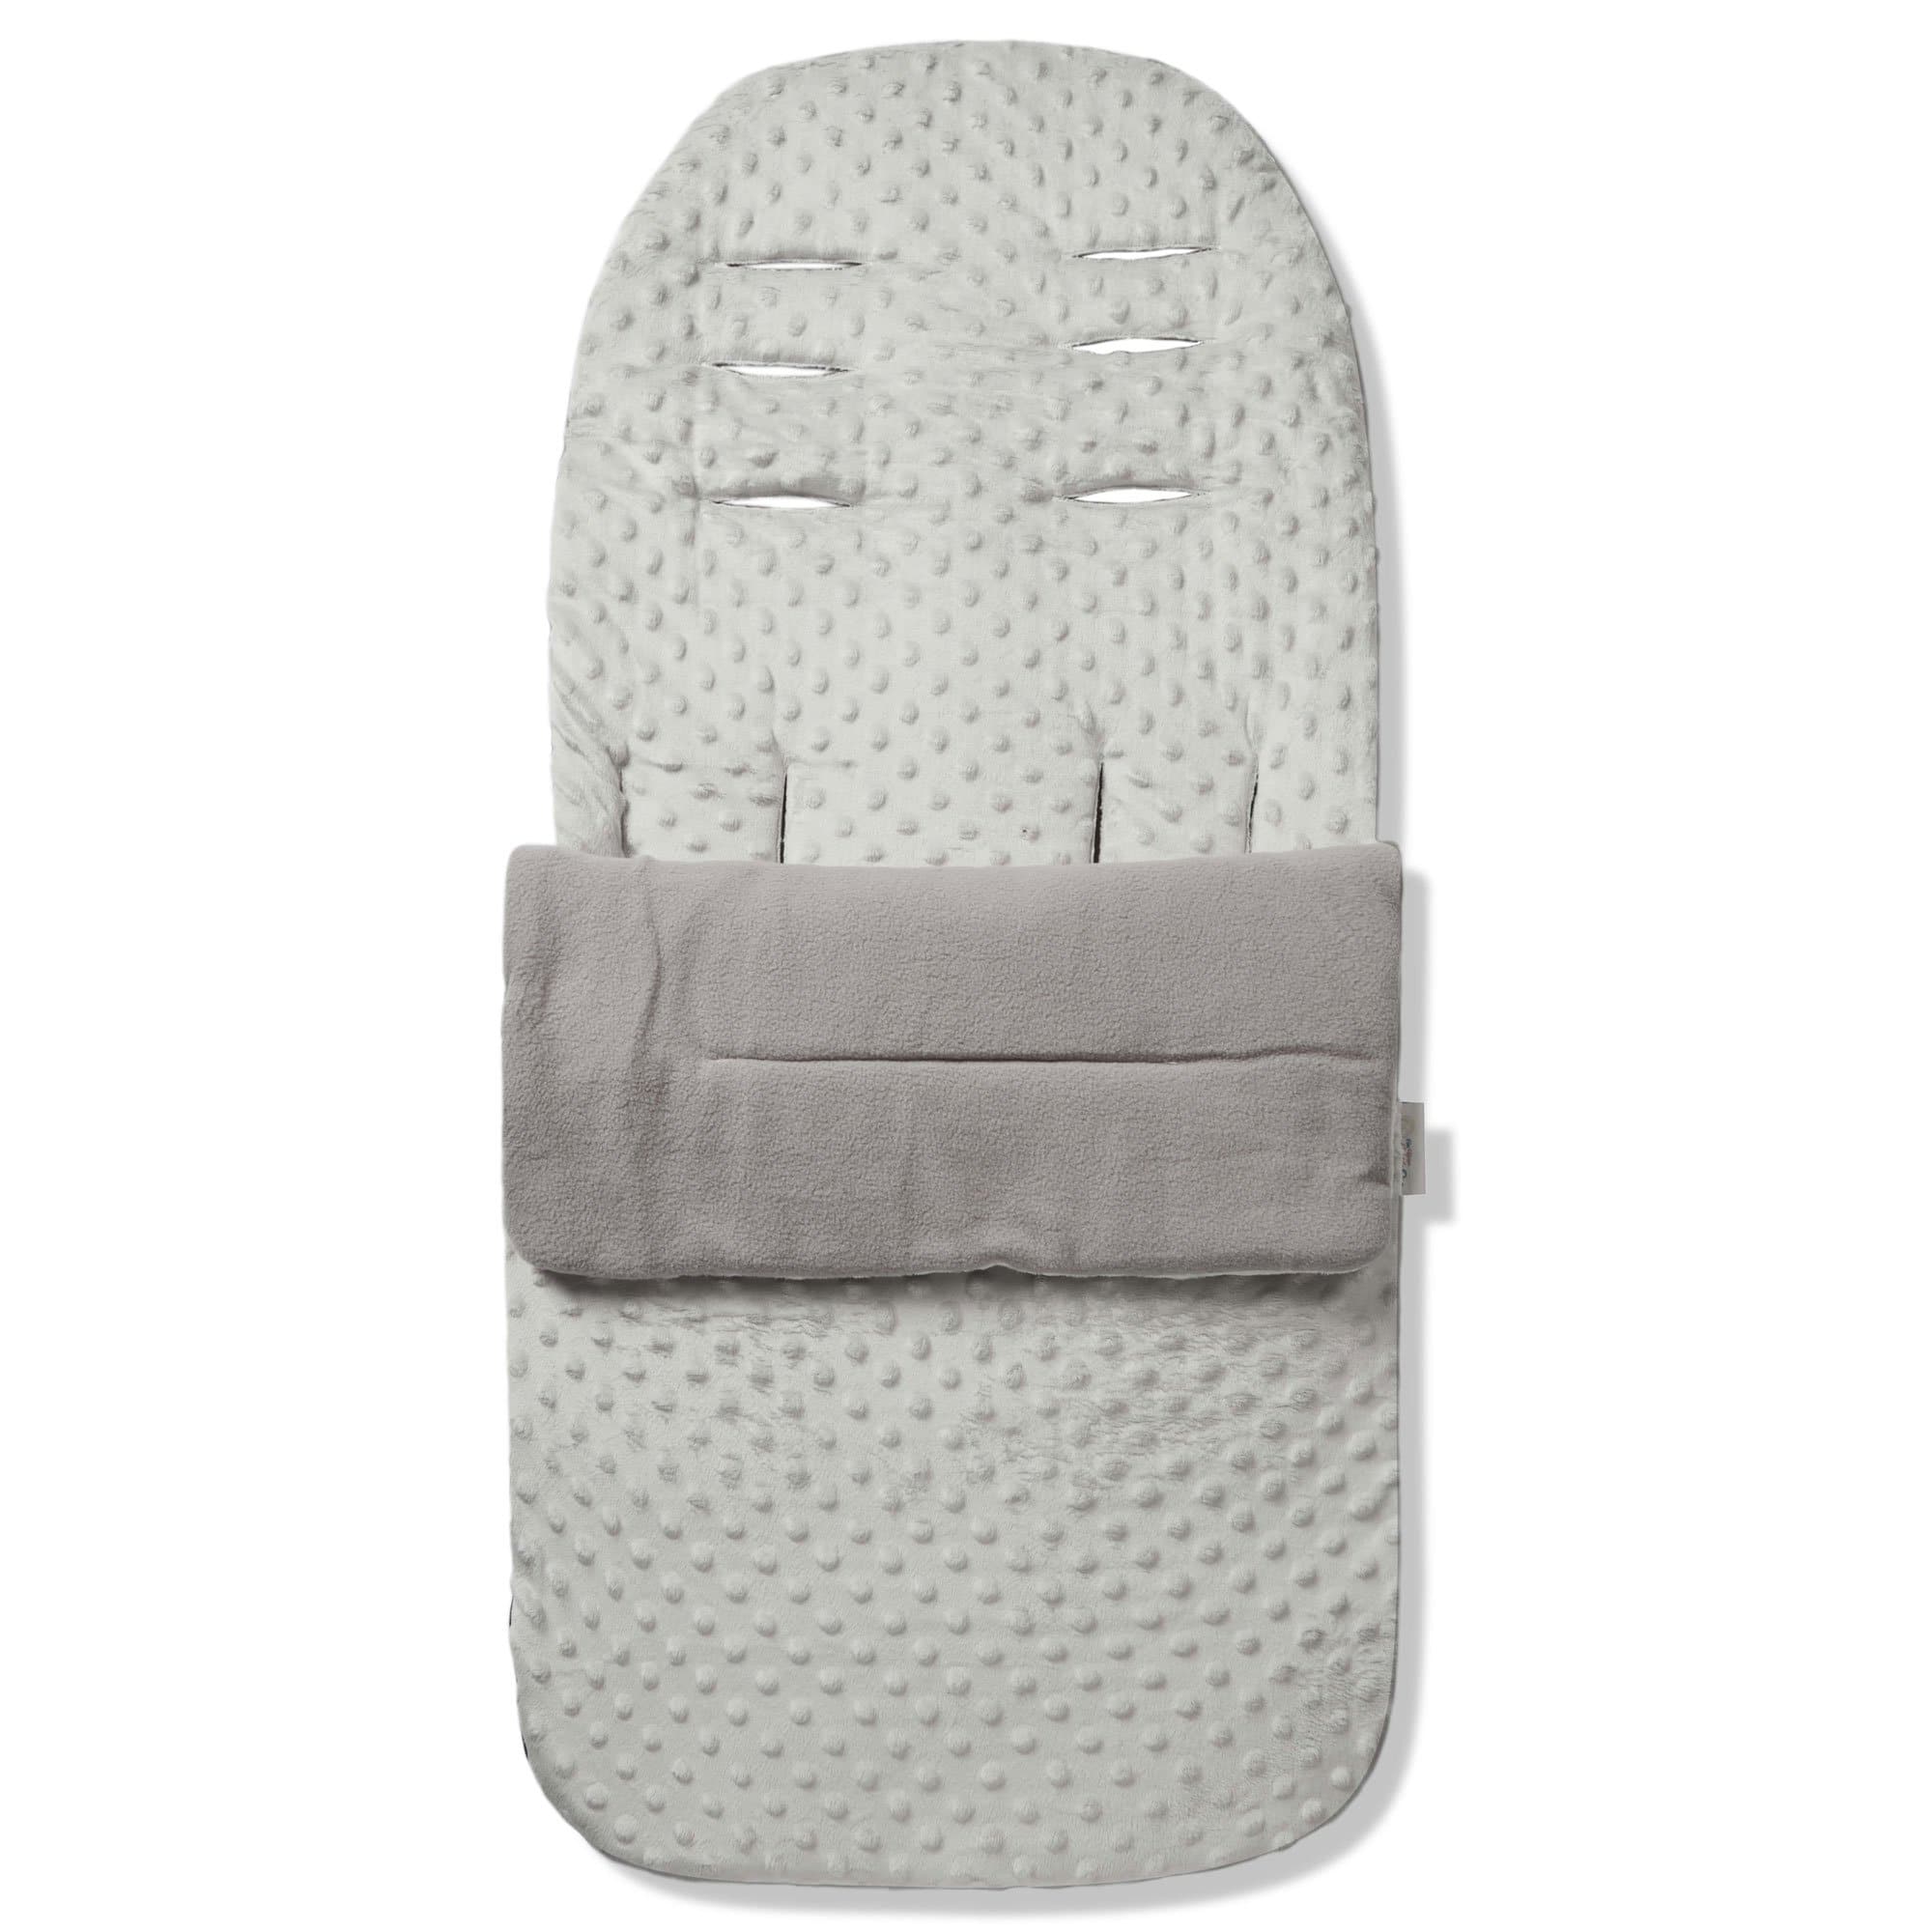 Dimple Footmuff / Cosy Toes Compatible with Bebecar - Grey / Fits All Models | For Your Little One